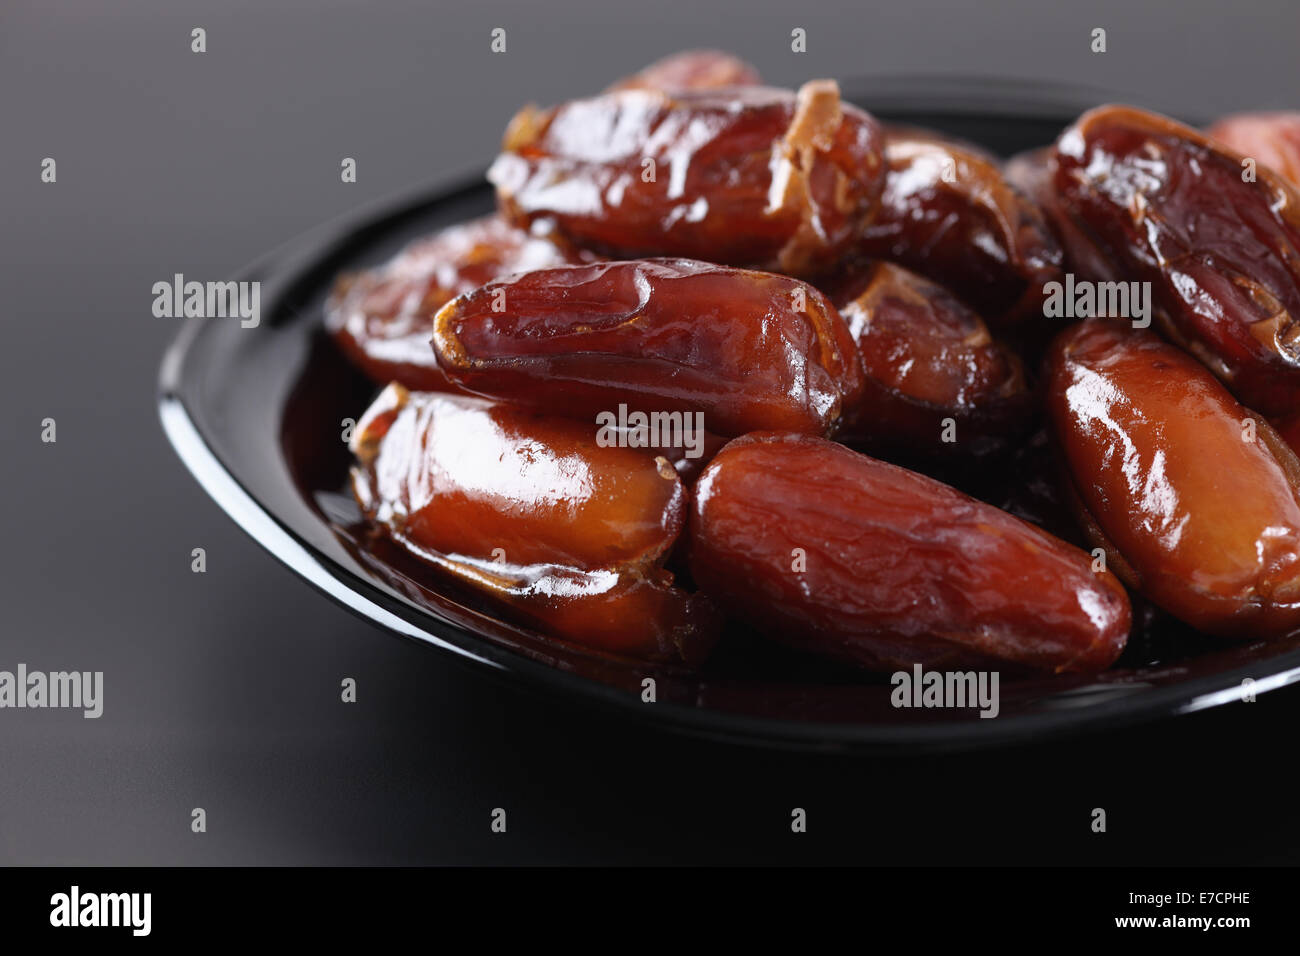 Date fruit in a black plate. Stock Photo